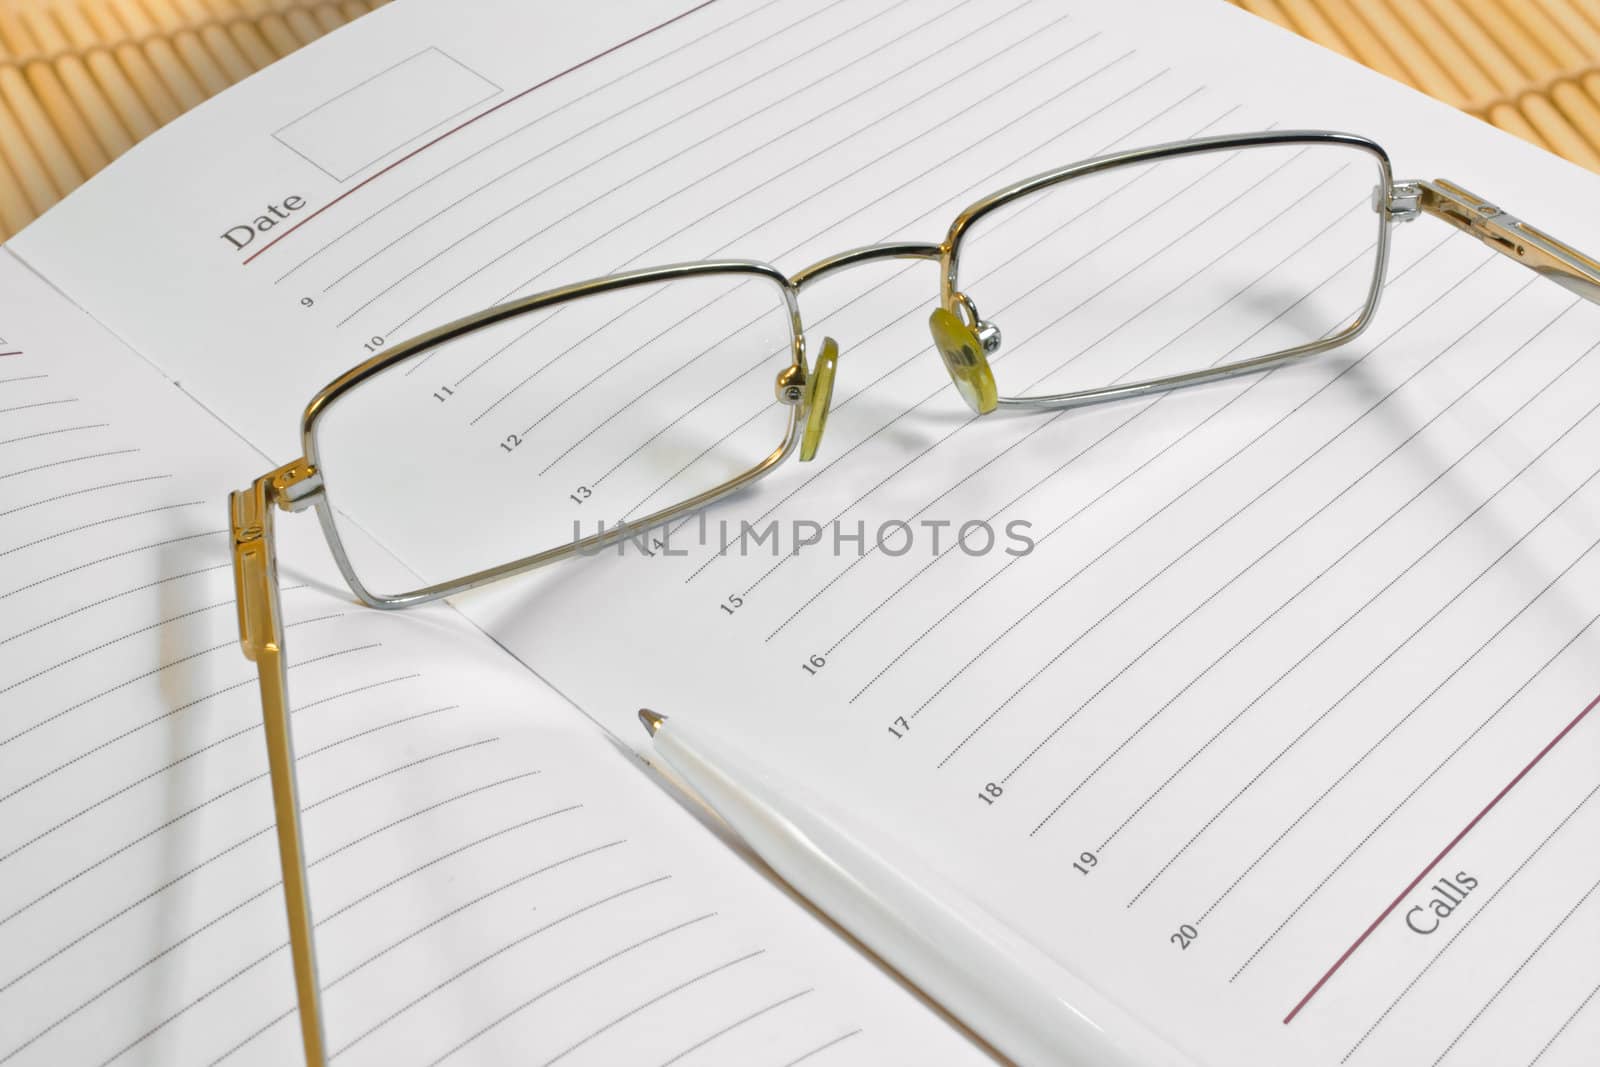 Glasses, pen and notebook, photographed close up.